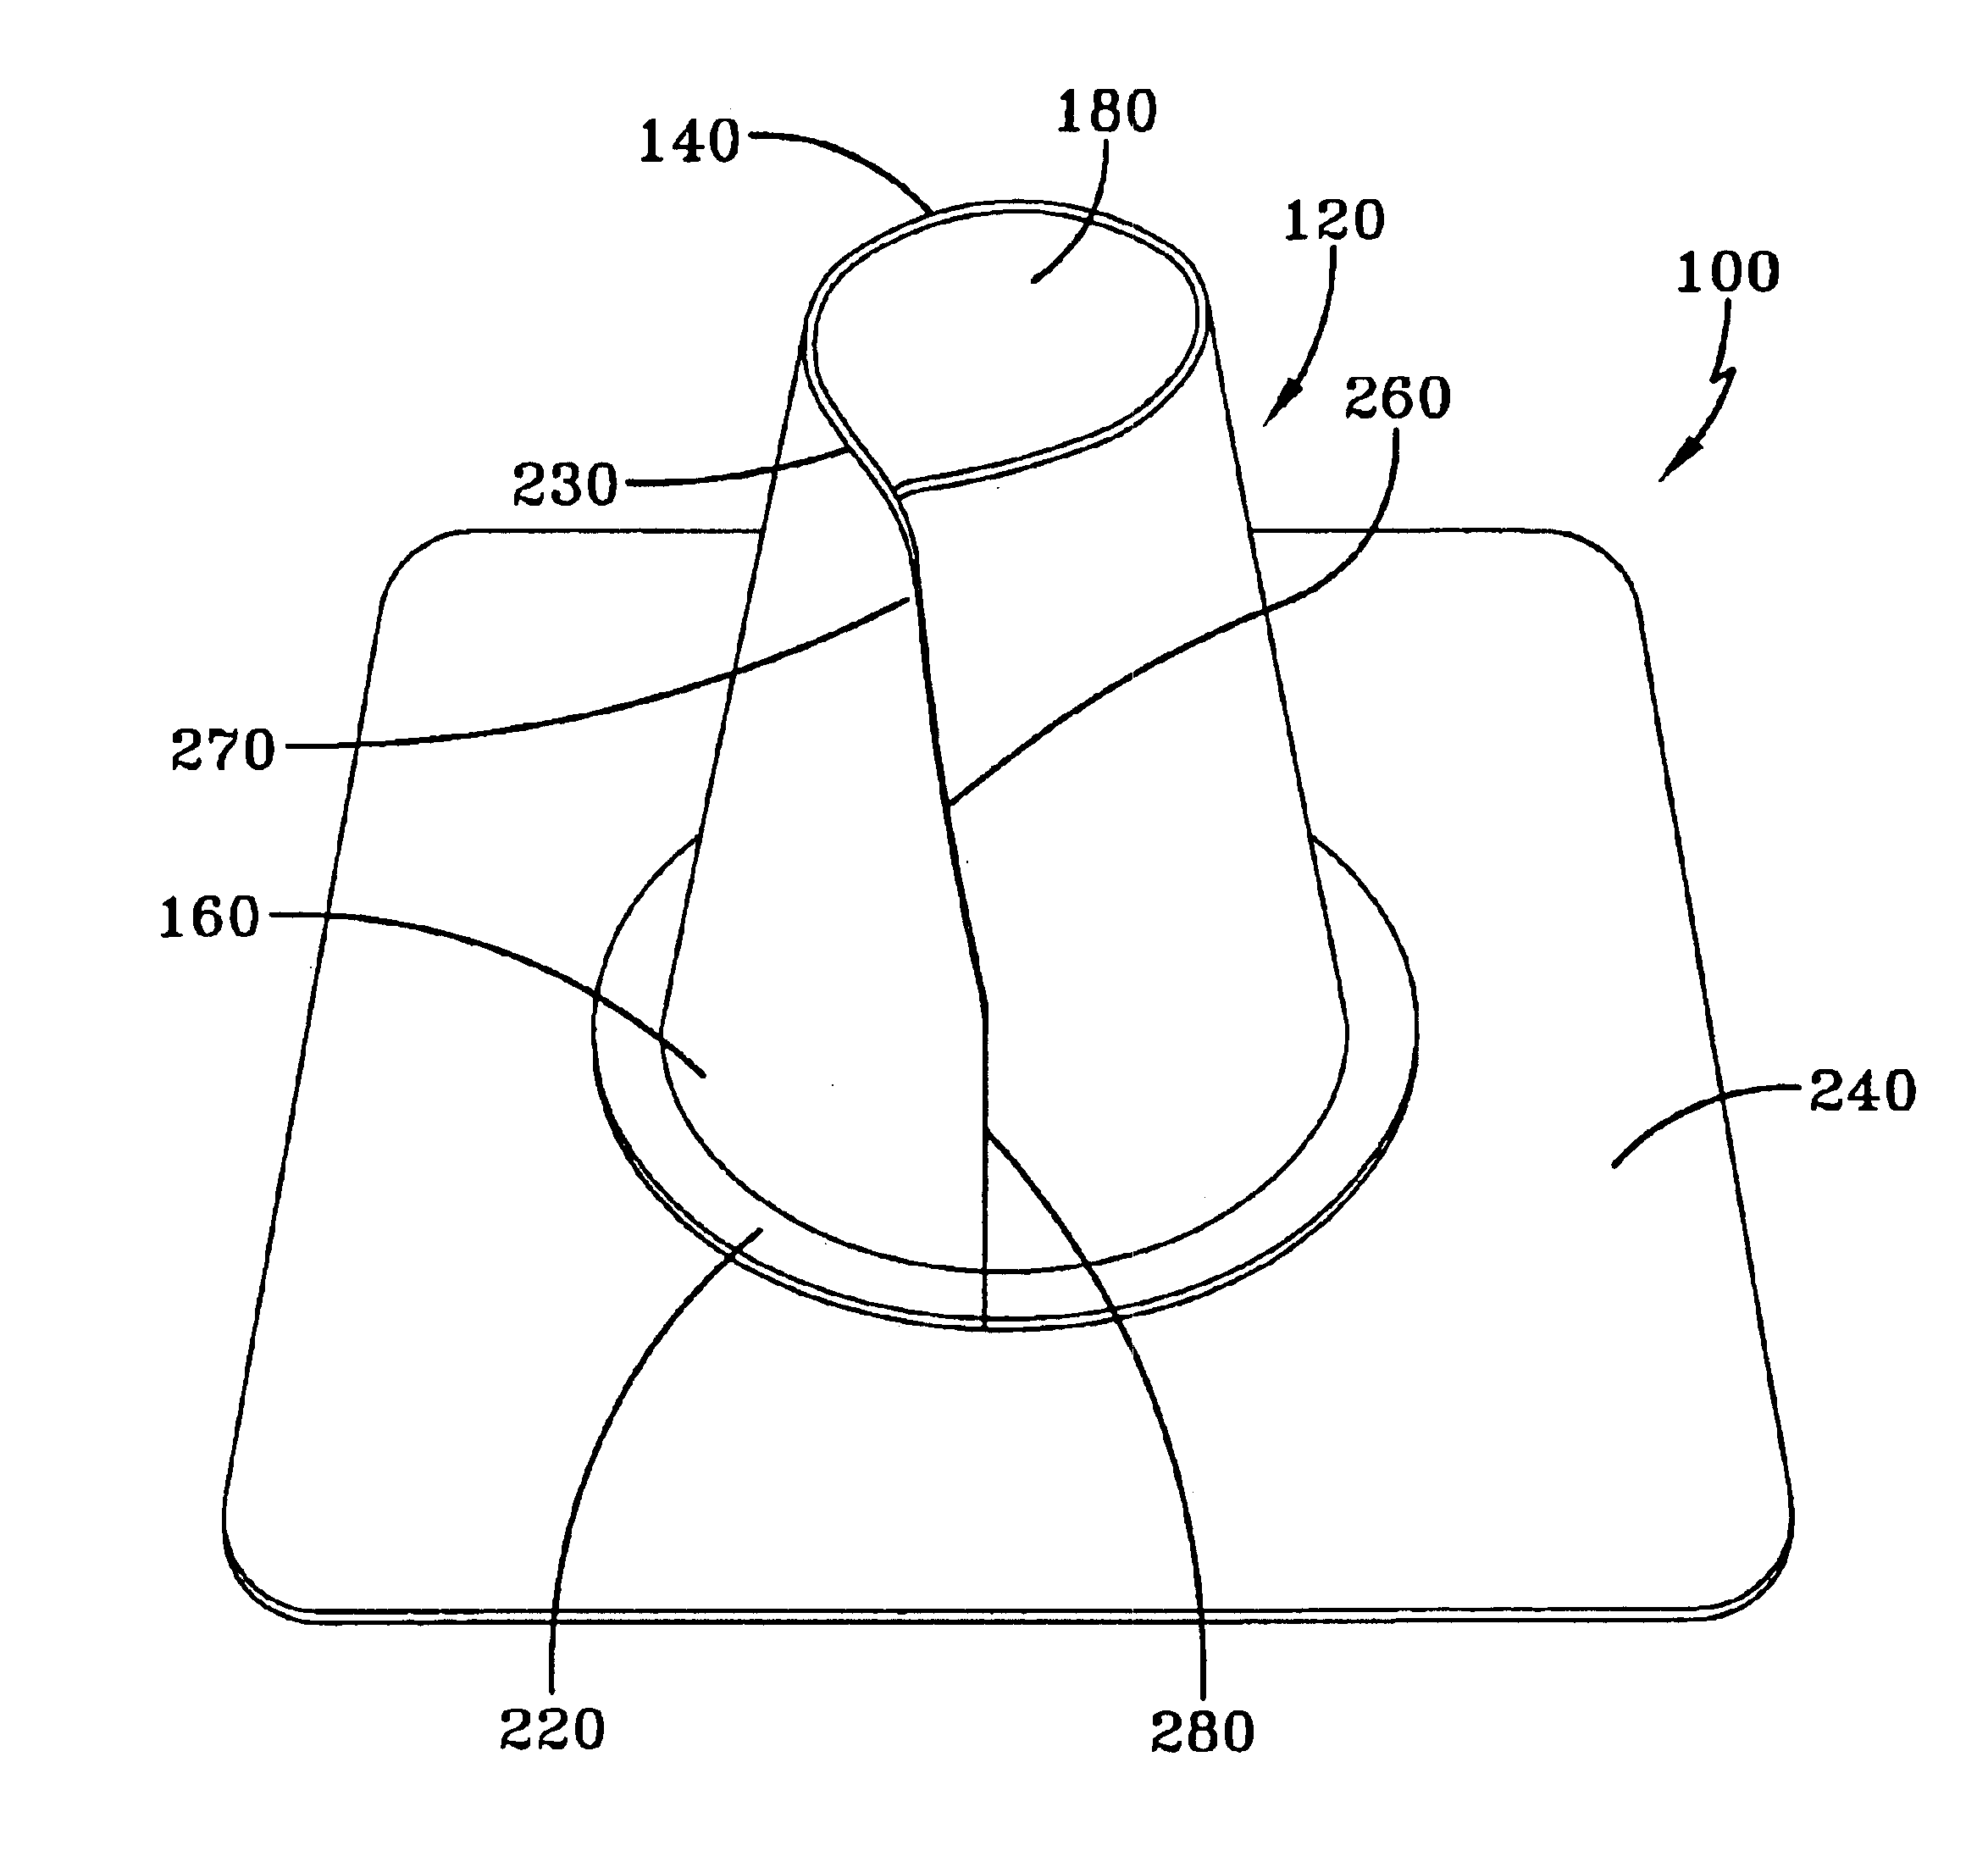 Apparatus and method for sealing a vertical protrusion on a roof